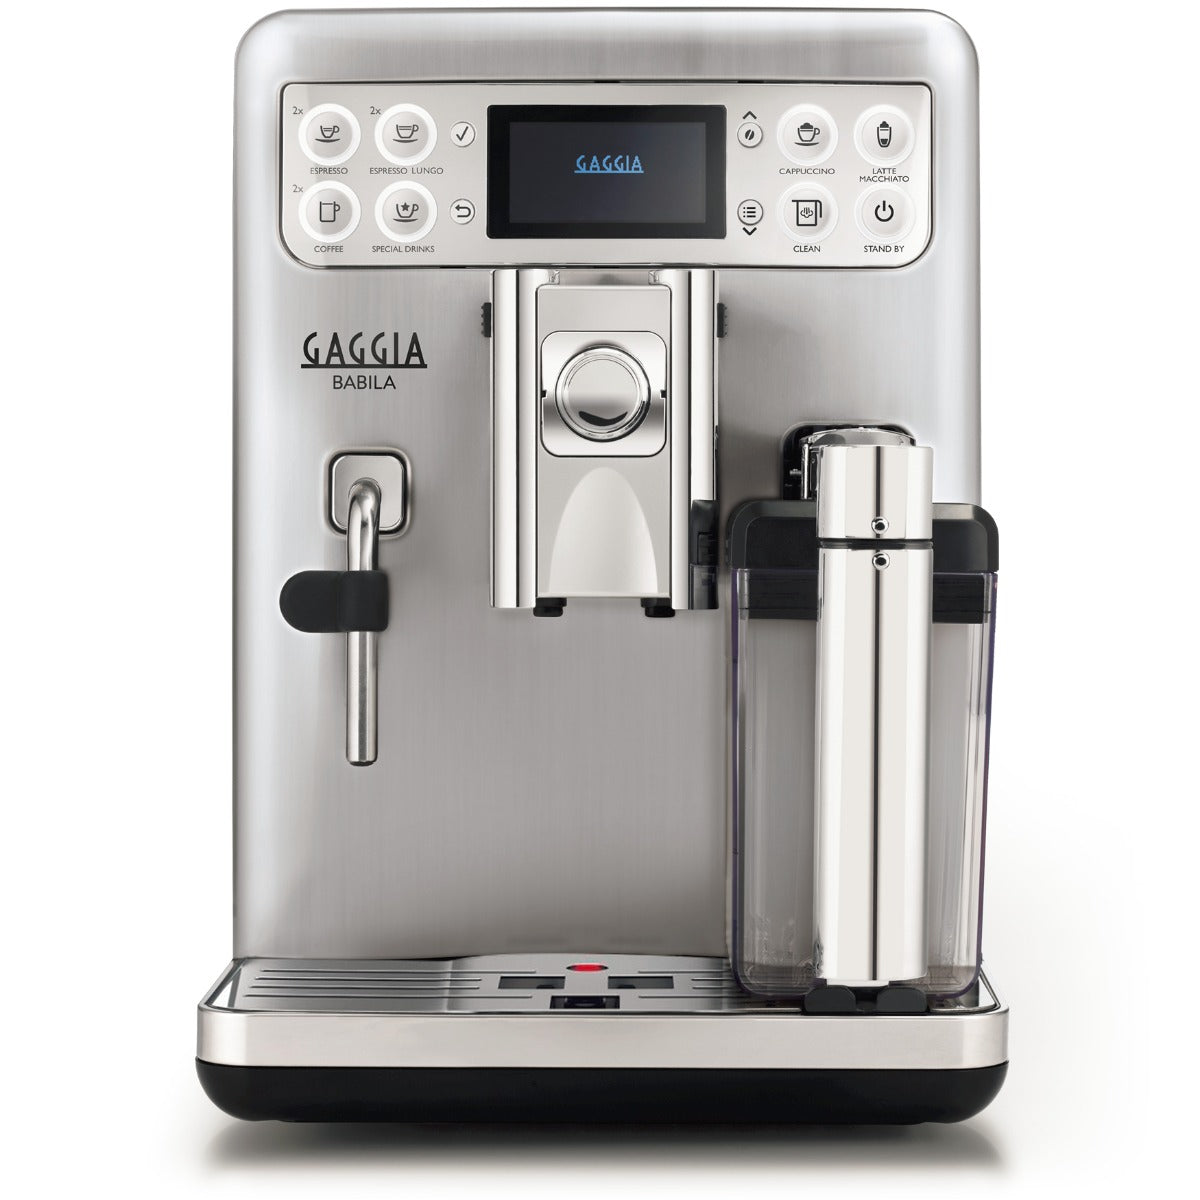 Portable Fully Automatic Espresso Coffee Machine, ANYTIME CAFE